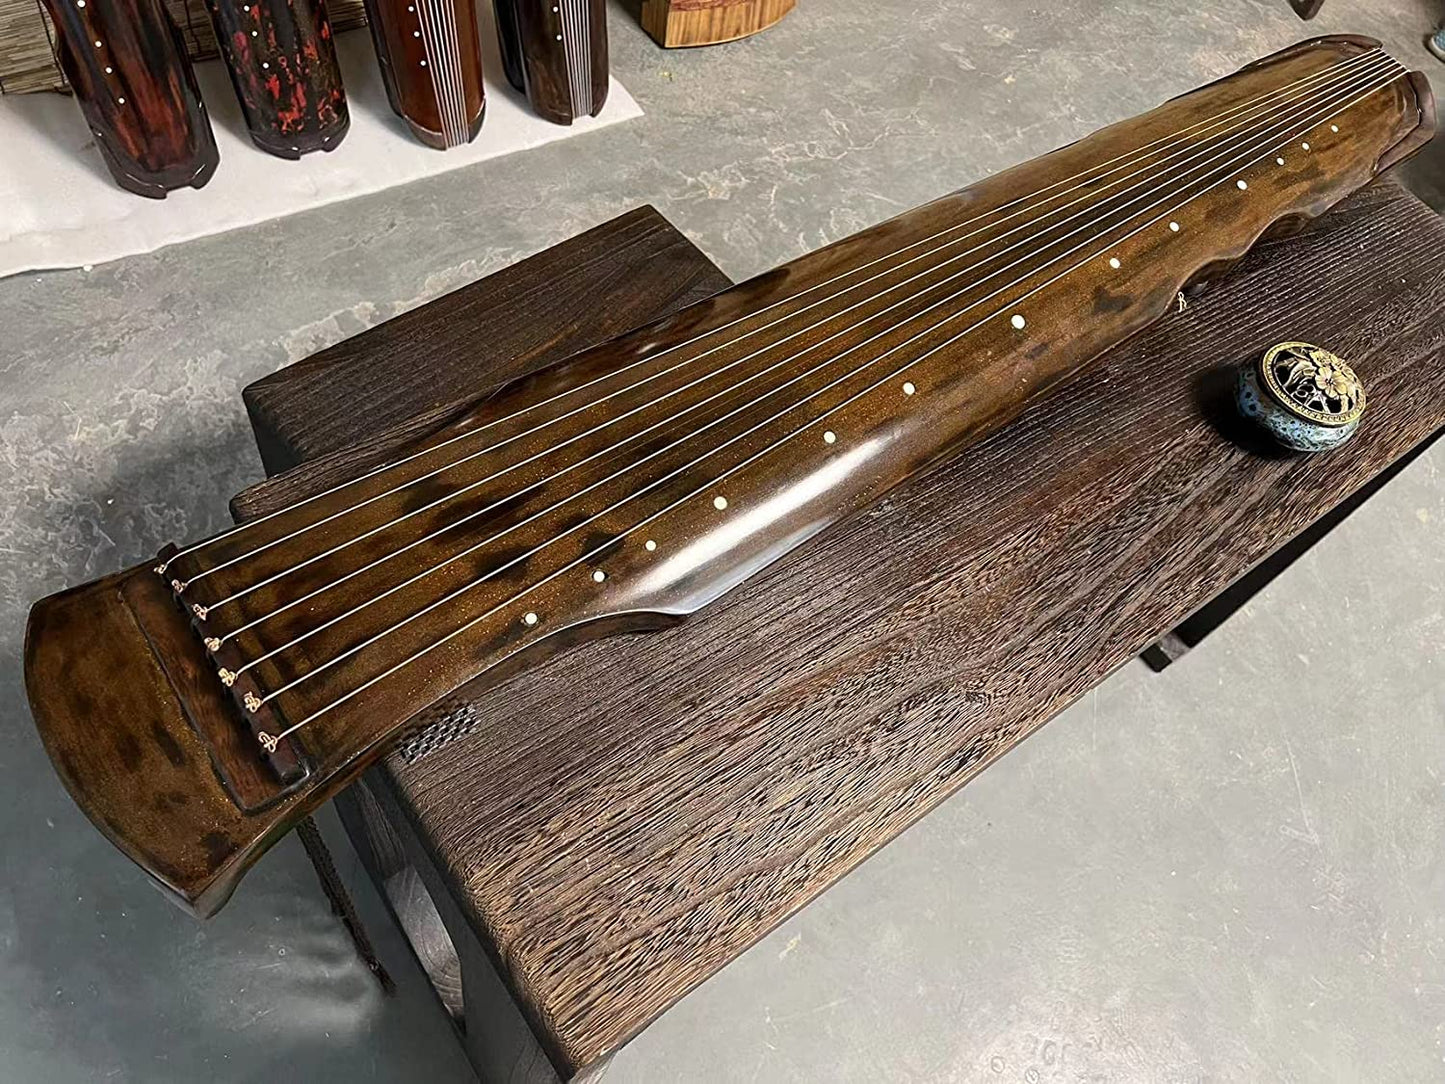 LANDTOM High-Level/concert level pure handmade Fuxi style Fir(杉木）Guqin/Chinese zither…